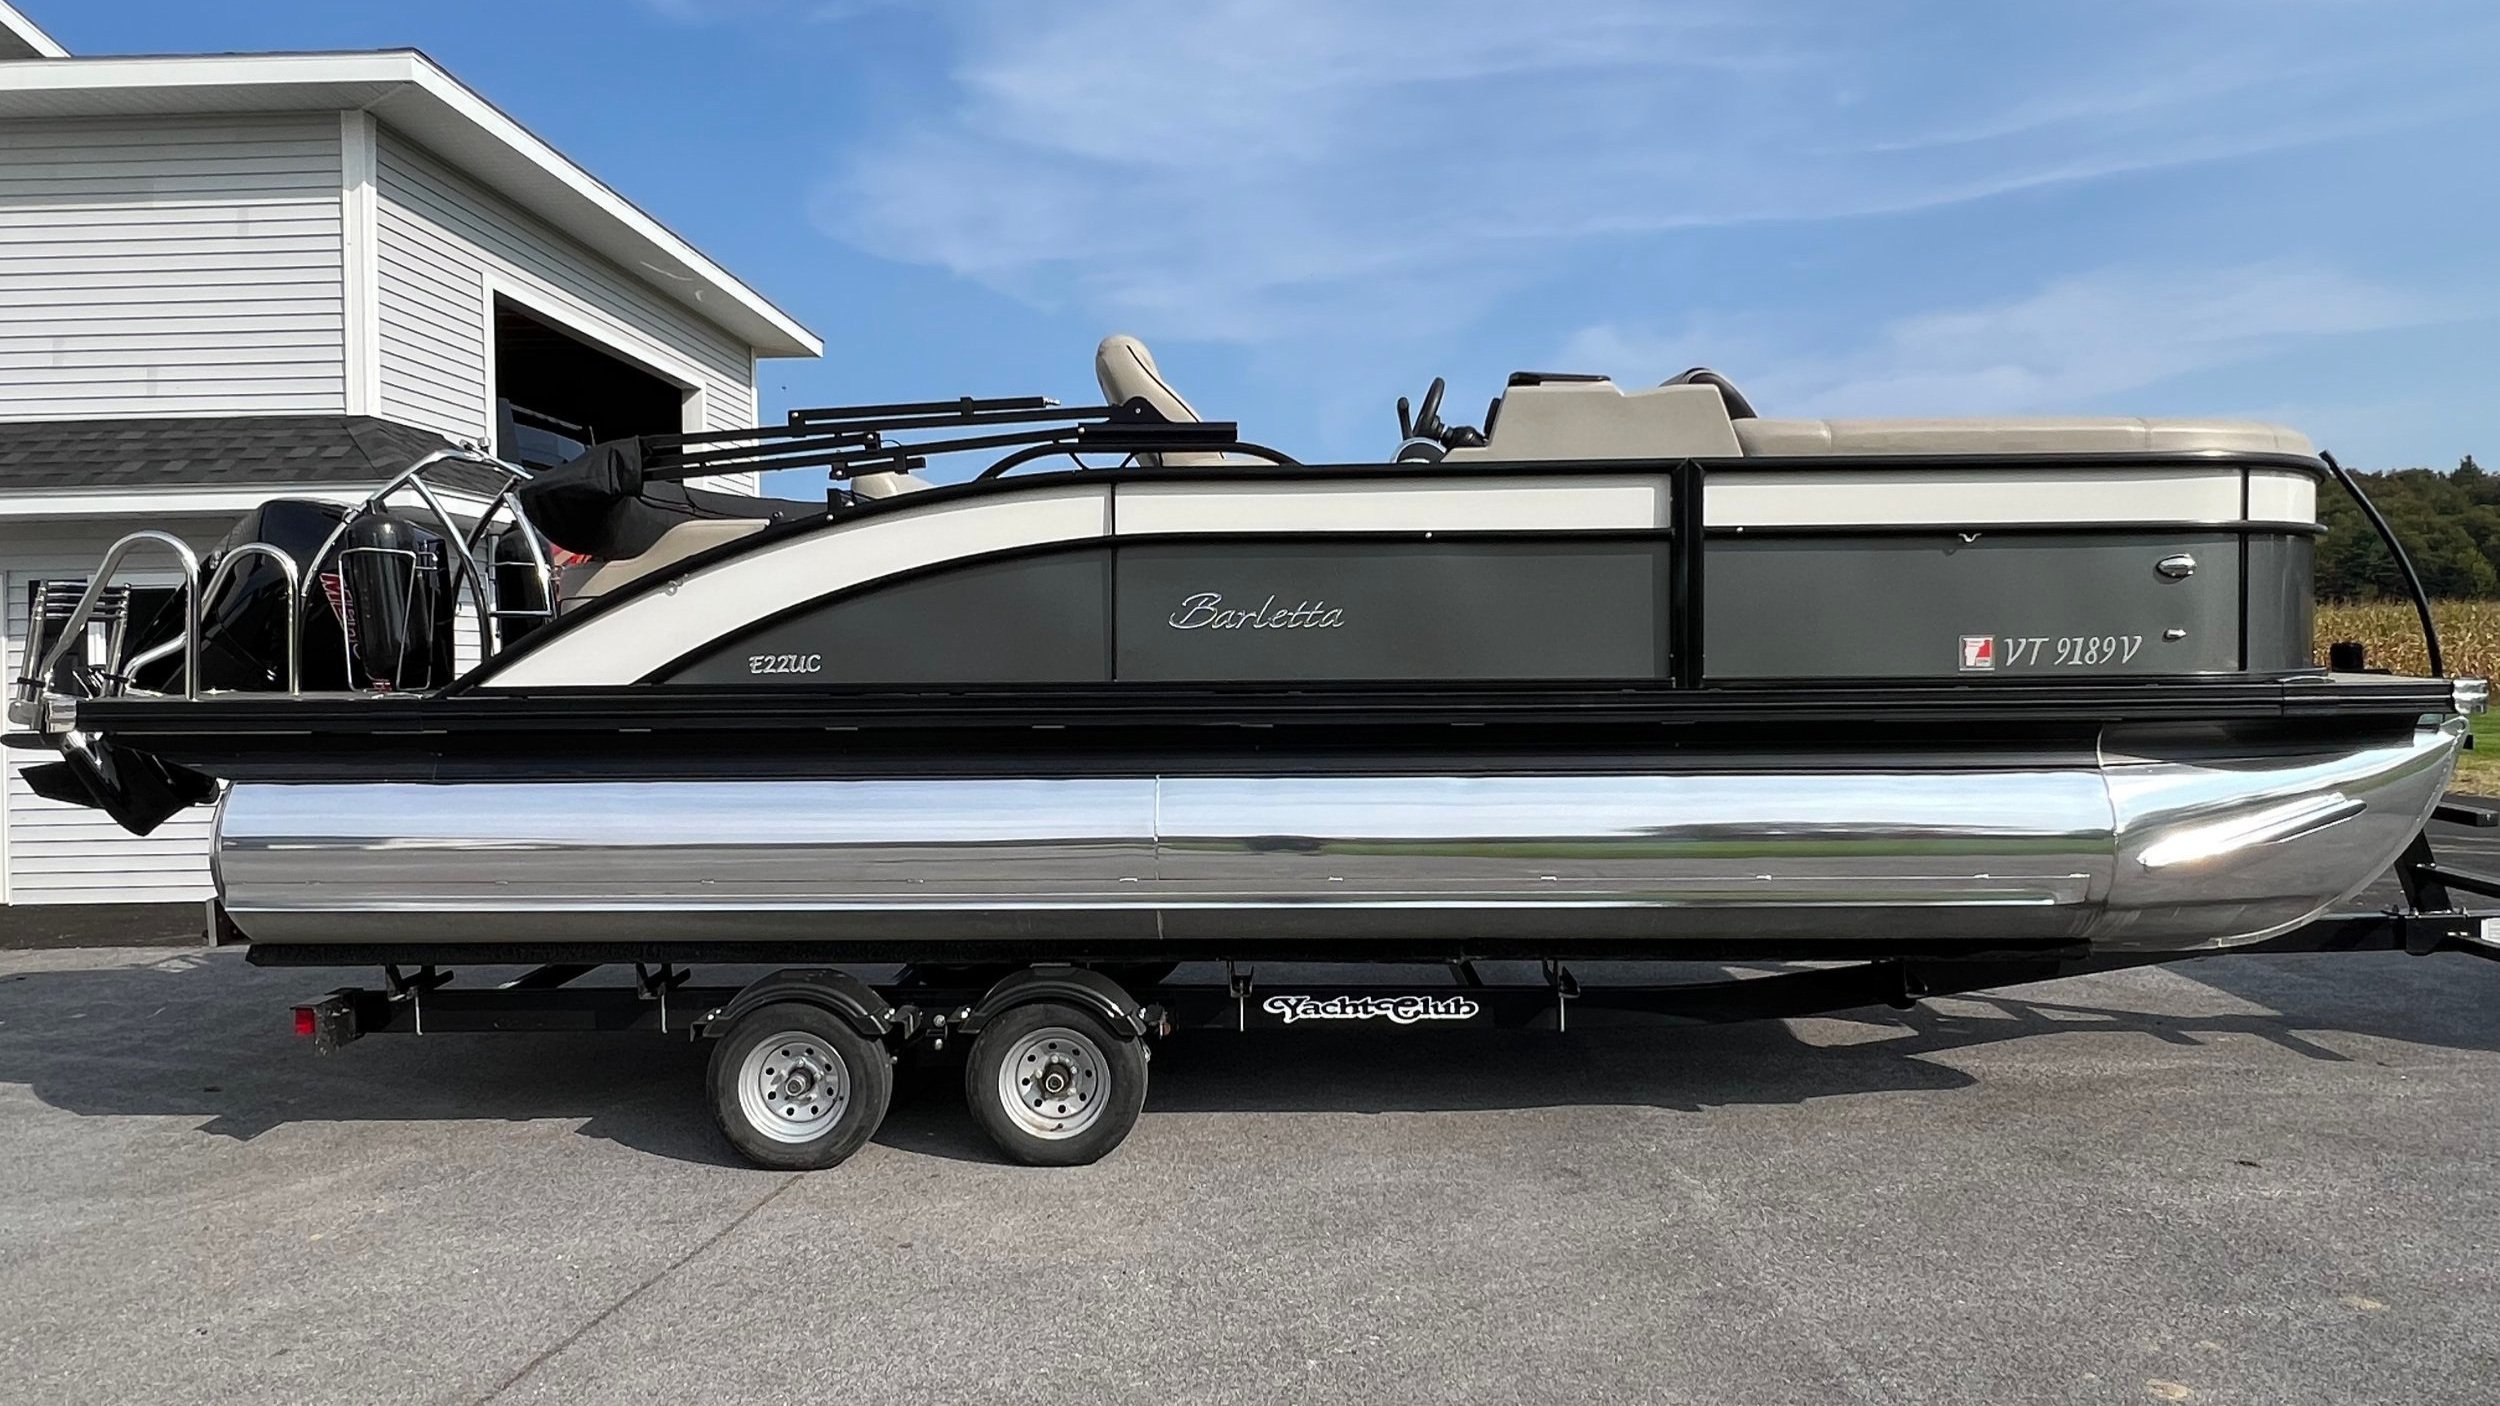 Clean Pontoon Boat Professional Detailed by Gloss Guru, VT in Enosburg Vermont, Franklin County. 